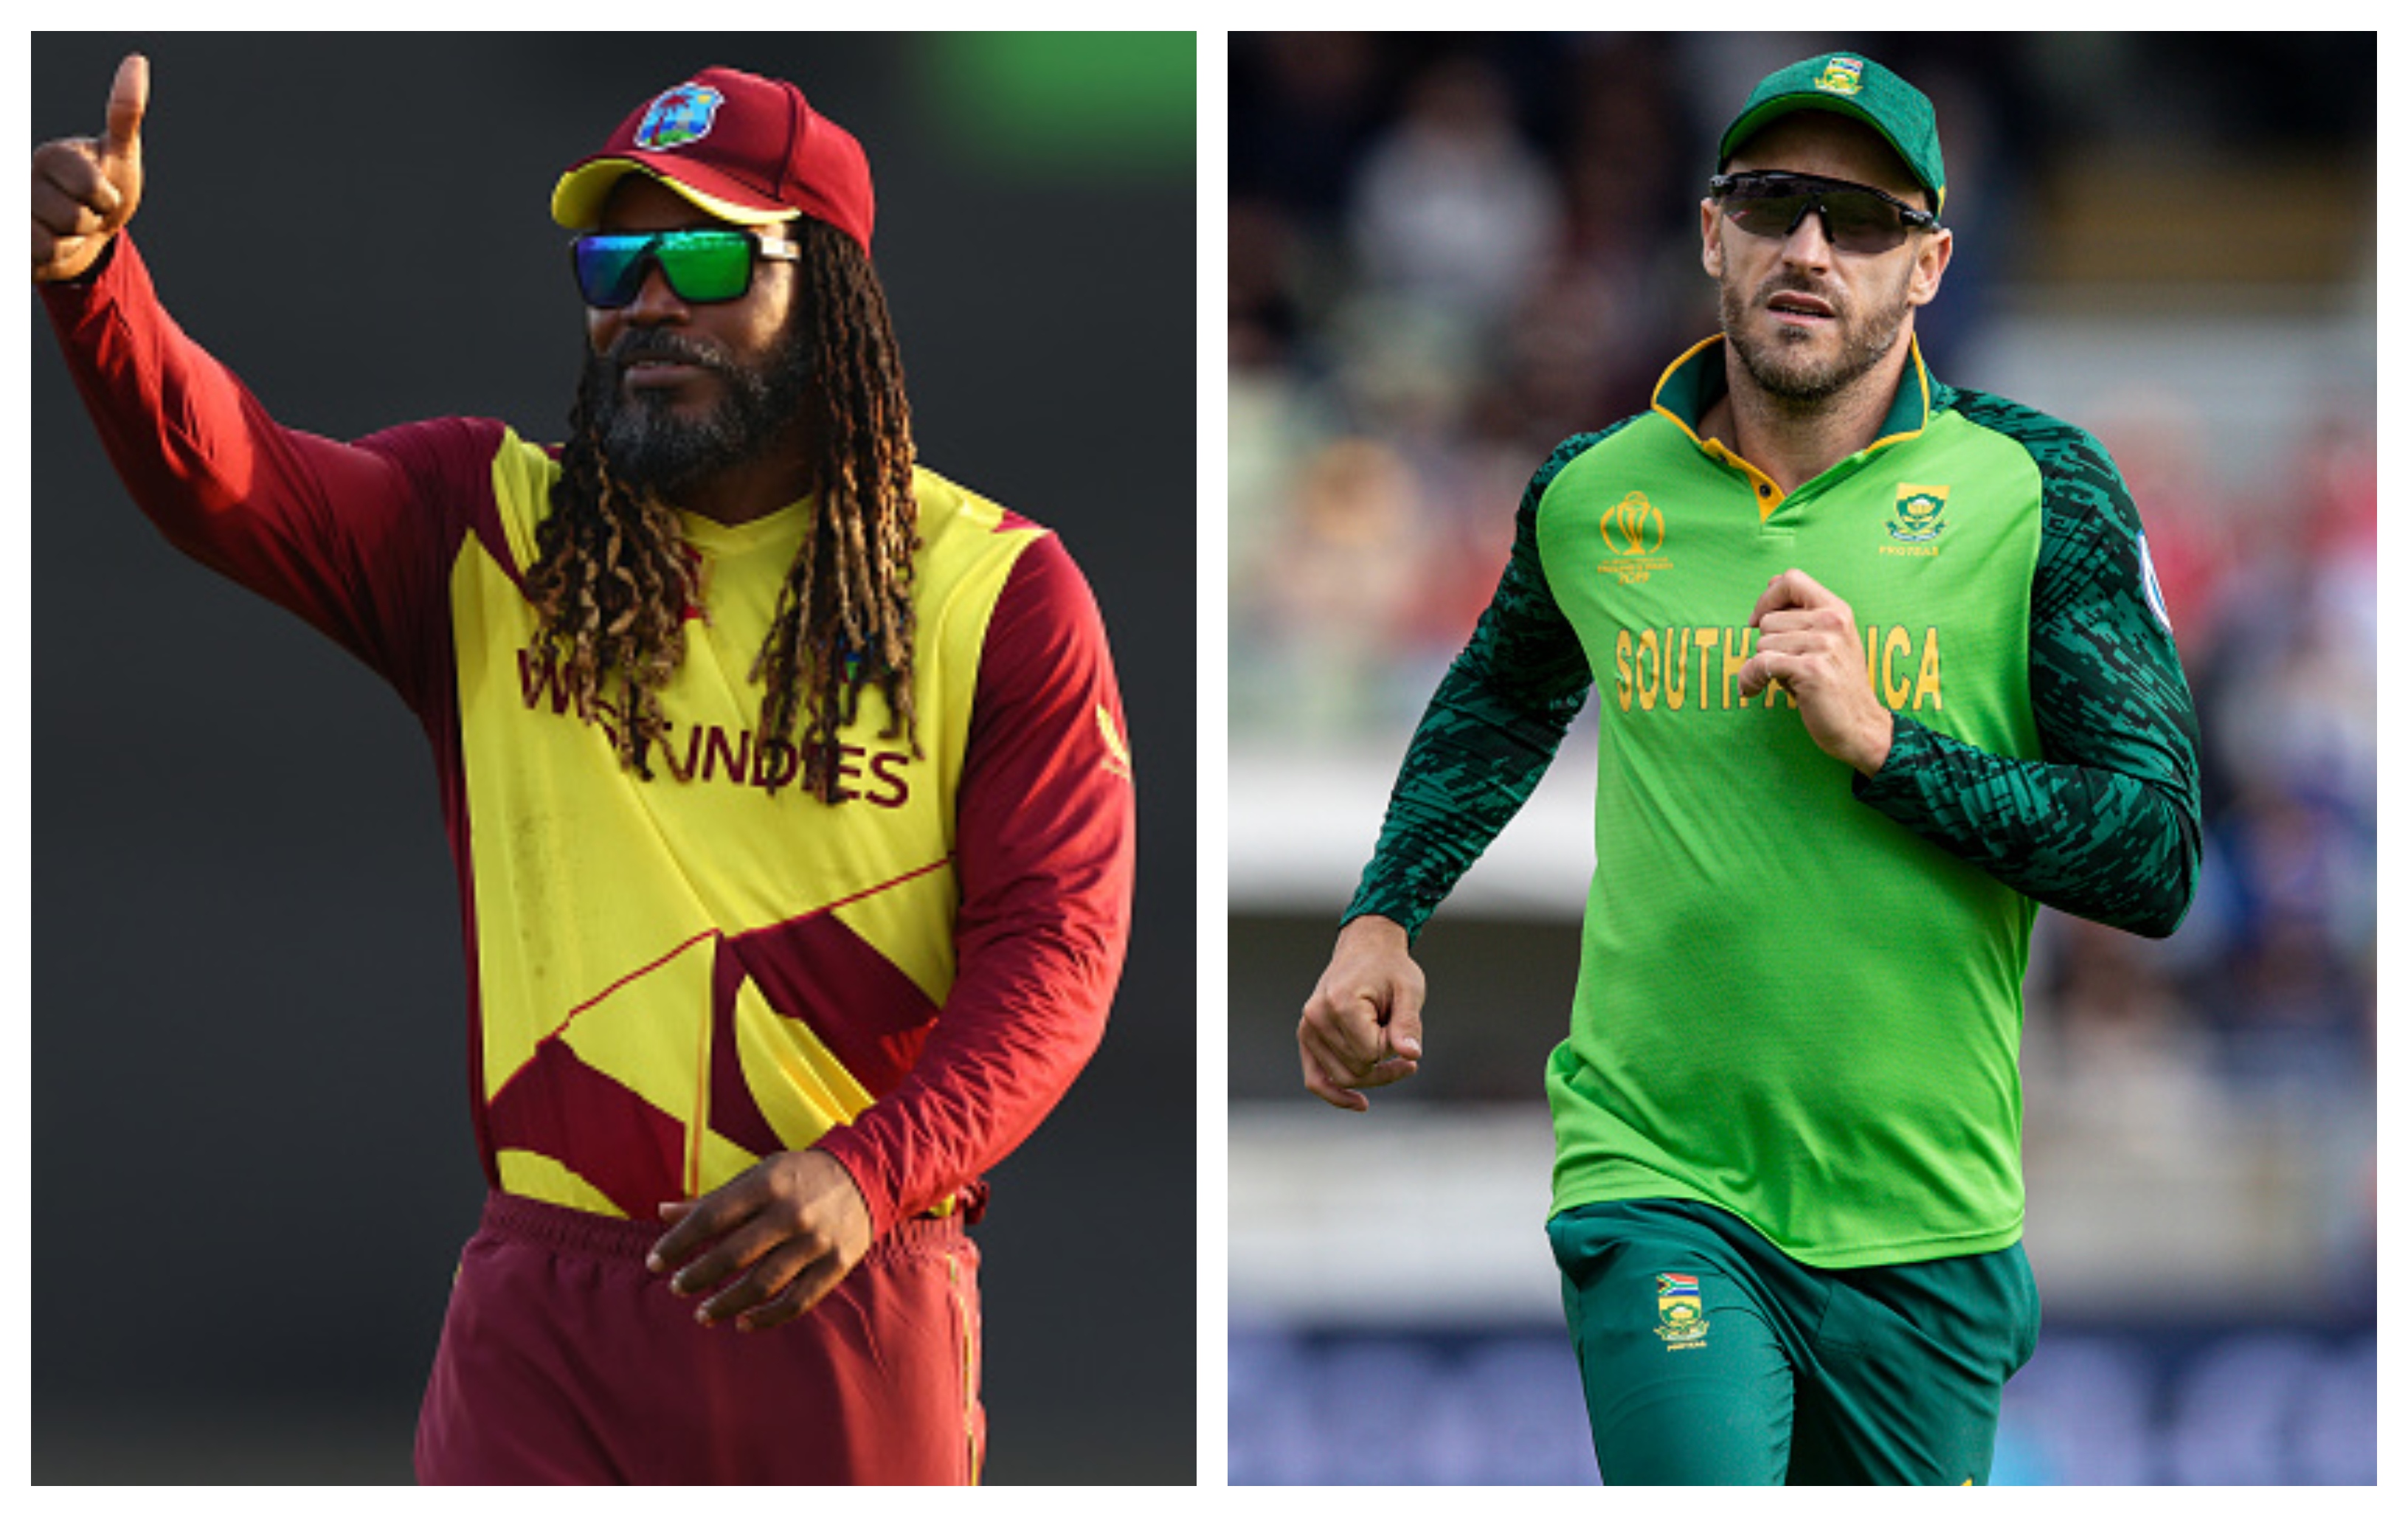 Chris Gayle and Faf du Plessis | Getty